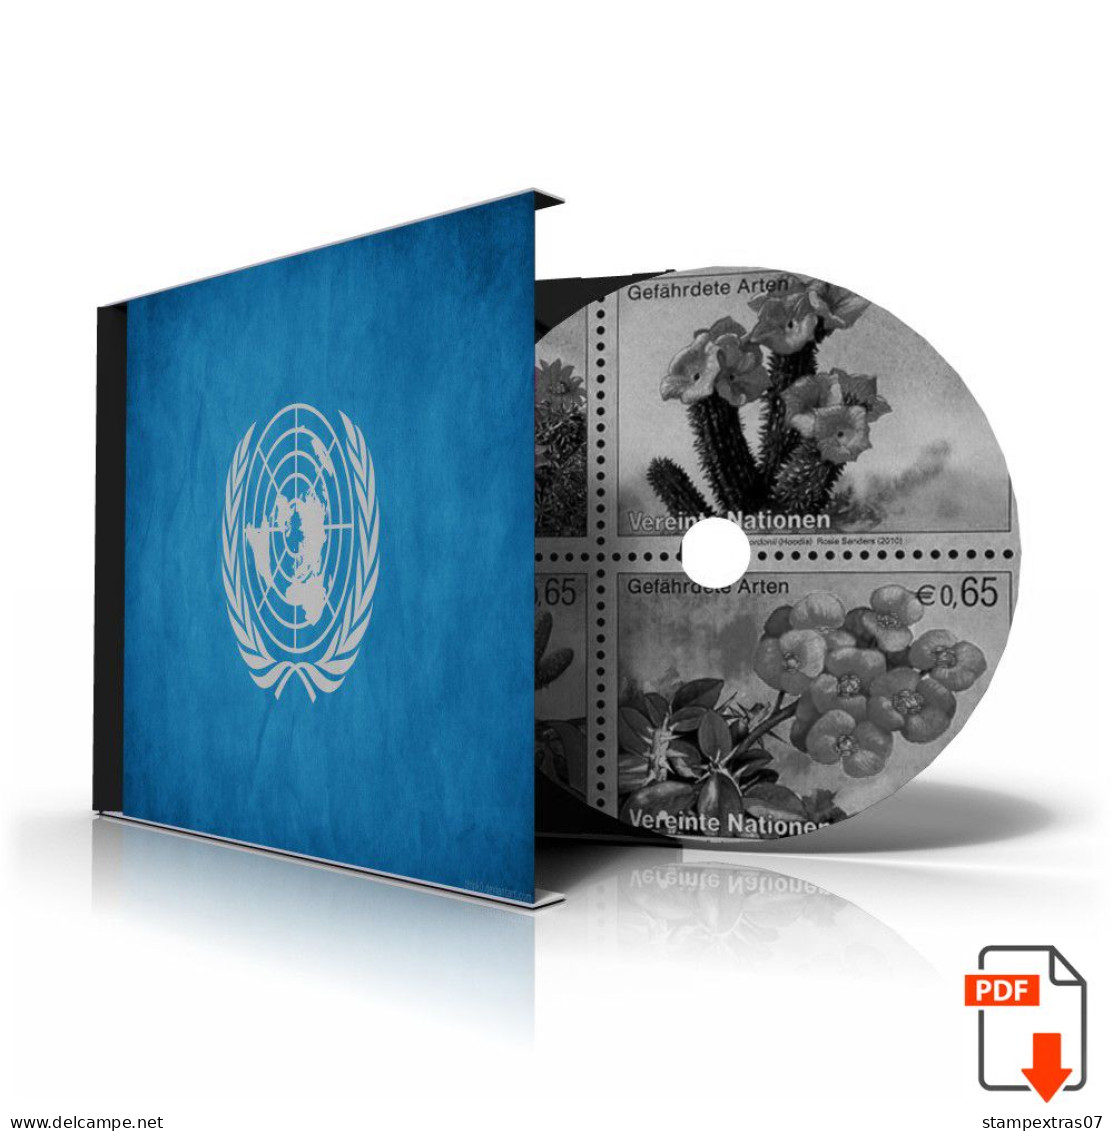 UNITED NATIONS - VIENNA 1979-2020 STAMP ALBUM PAGES (165 B&w Illustrated Pages) - Inglese